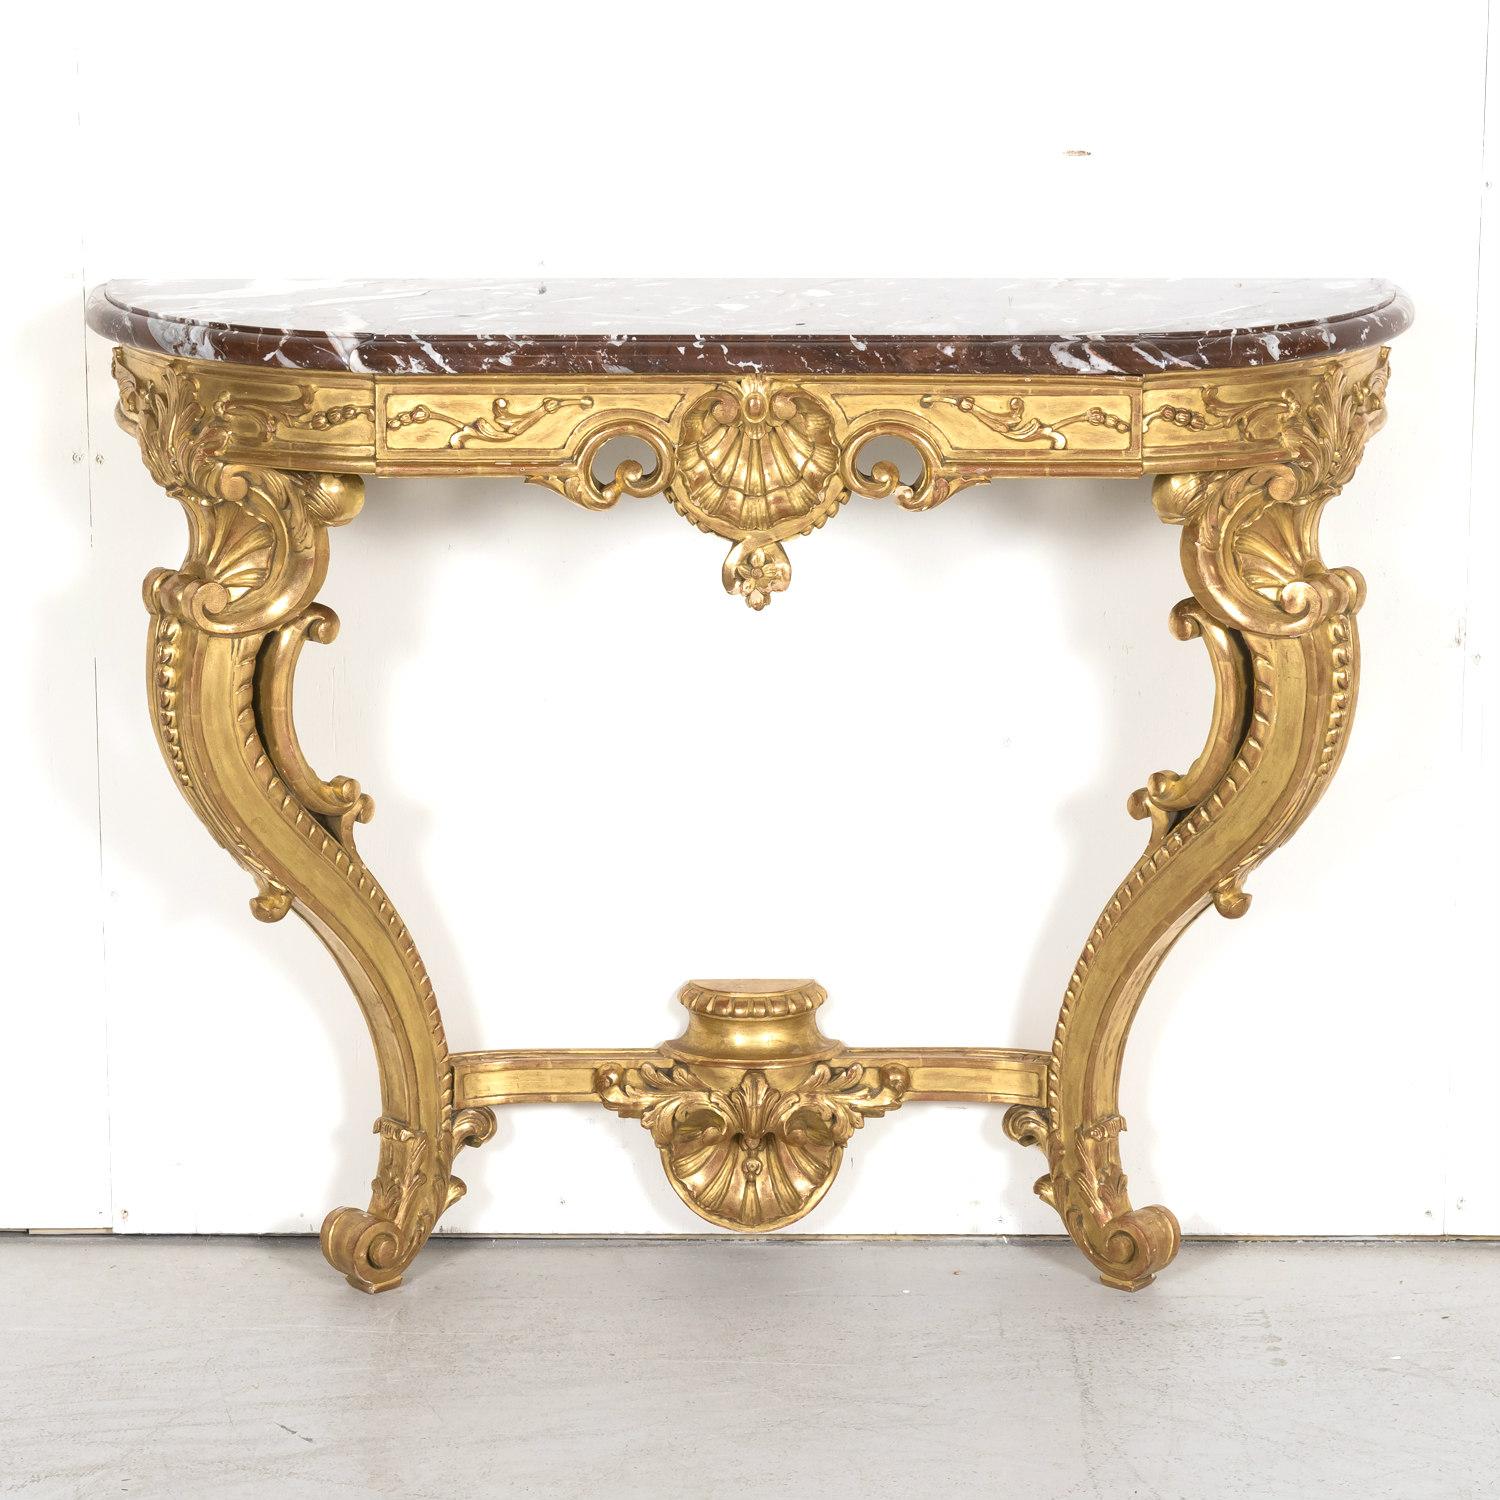 A fine 19th Century French Louis XV Rococo style giltwood wall mounted console having the original Rouge Royal marble top above a giltwood frame with rounded corners. Featuring an intricately carved frieze with a central shell and foliate motifs,